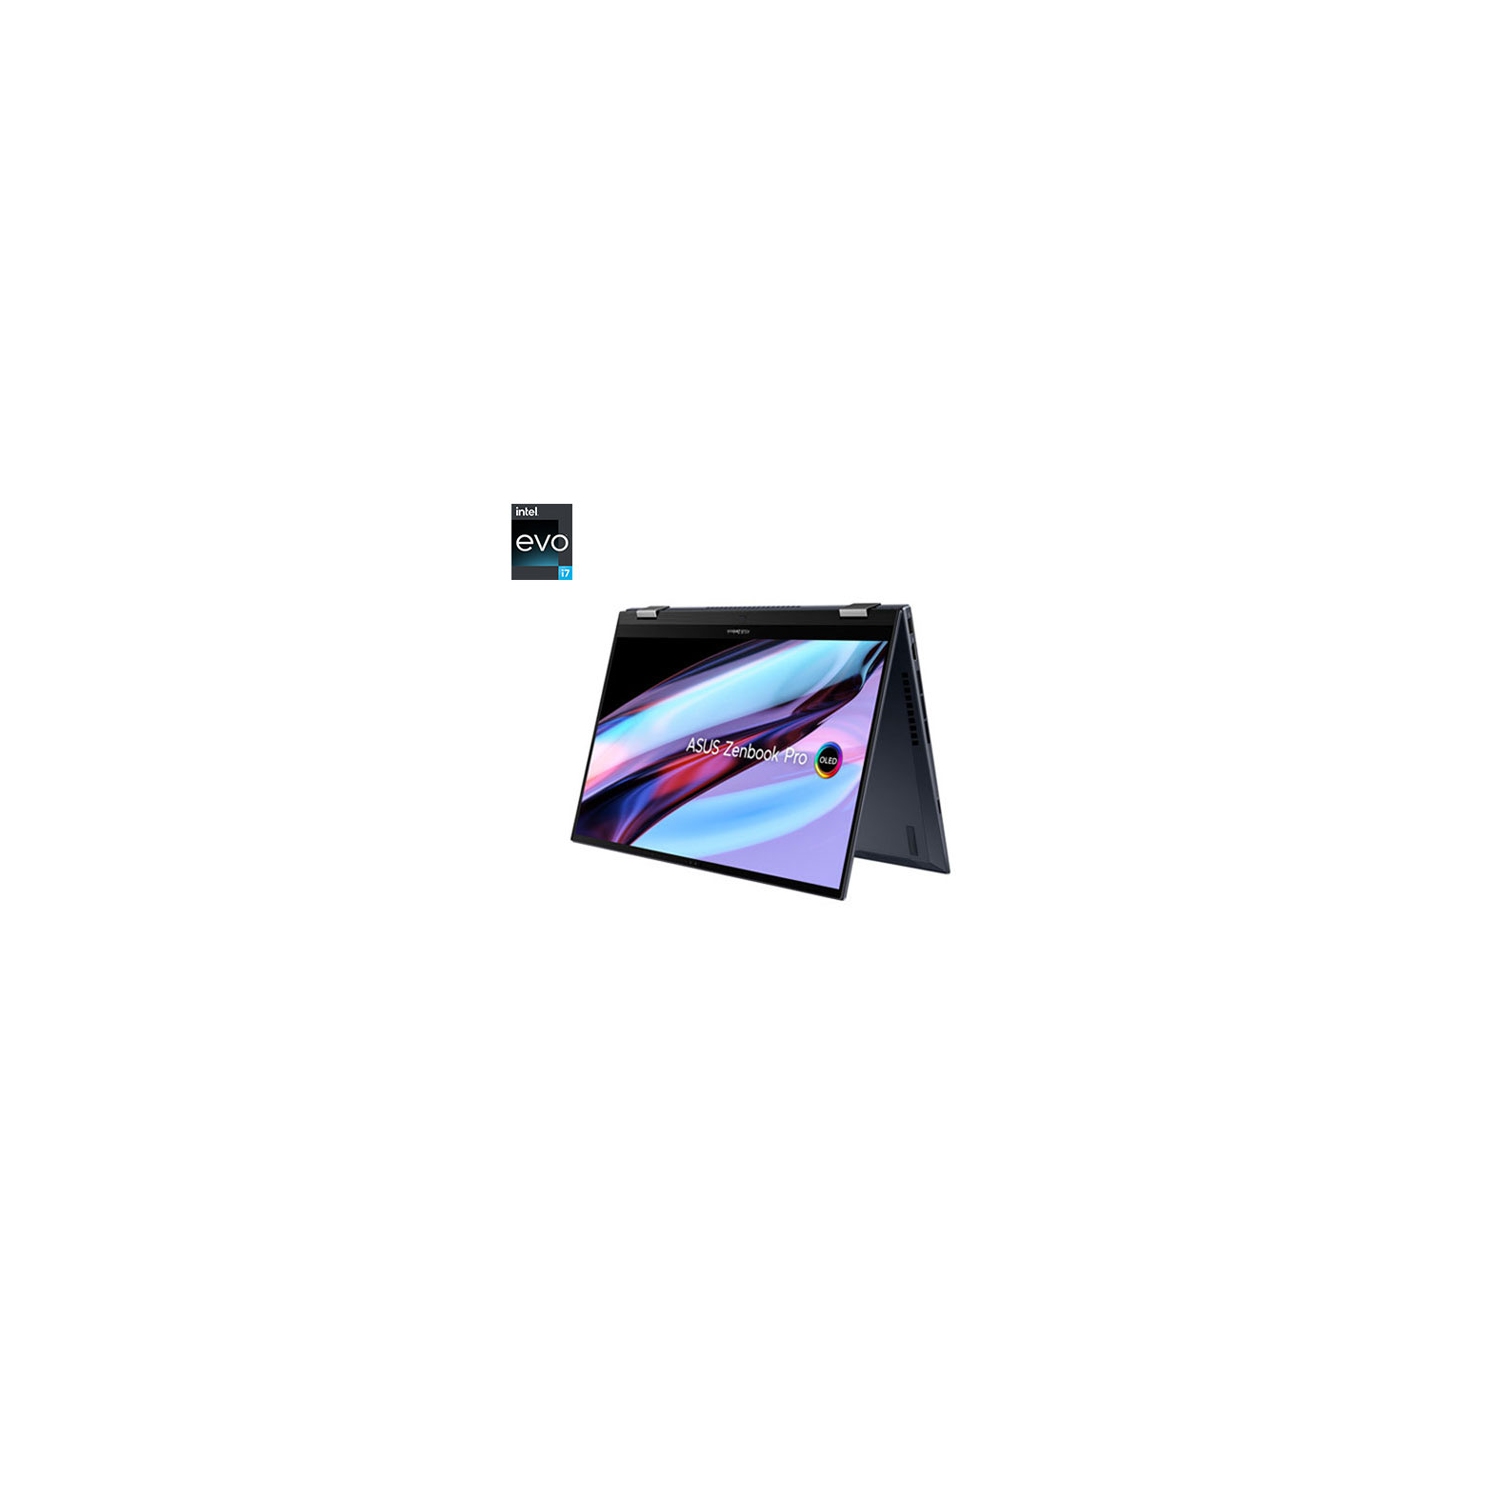 ASUS ZenBook Pro OLED 2.8k 15.6" Touchscreen 2-in-1 Laptop (Intel Core i7-12700H/512GB SSD/16GB RAM) - Refurbished